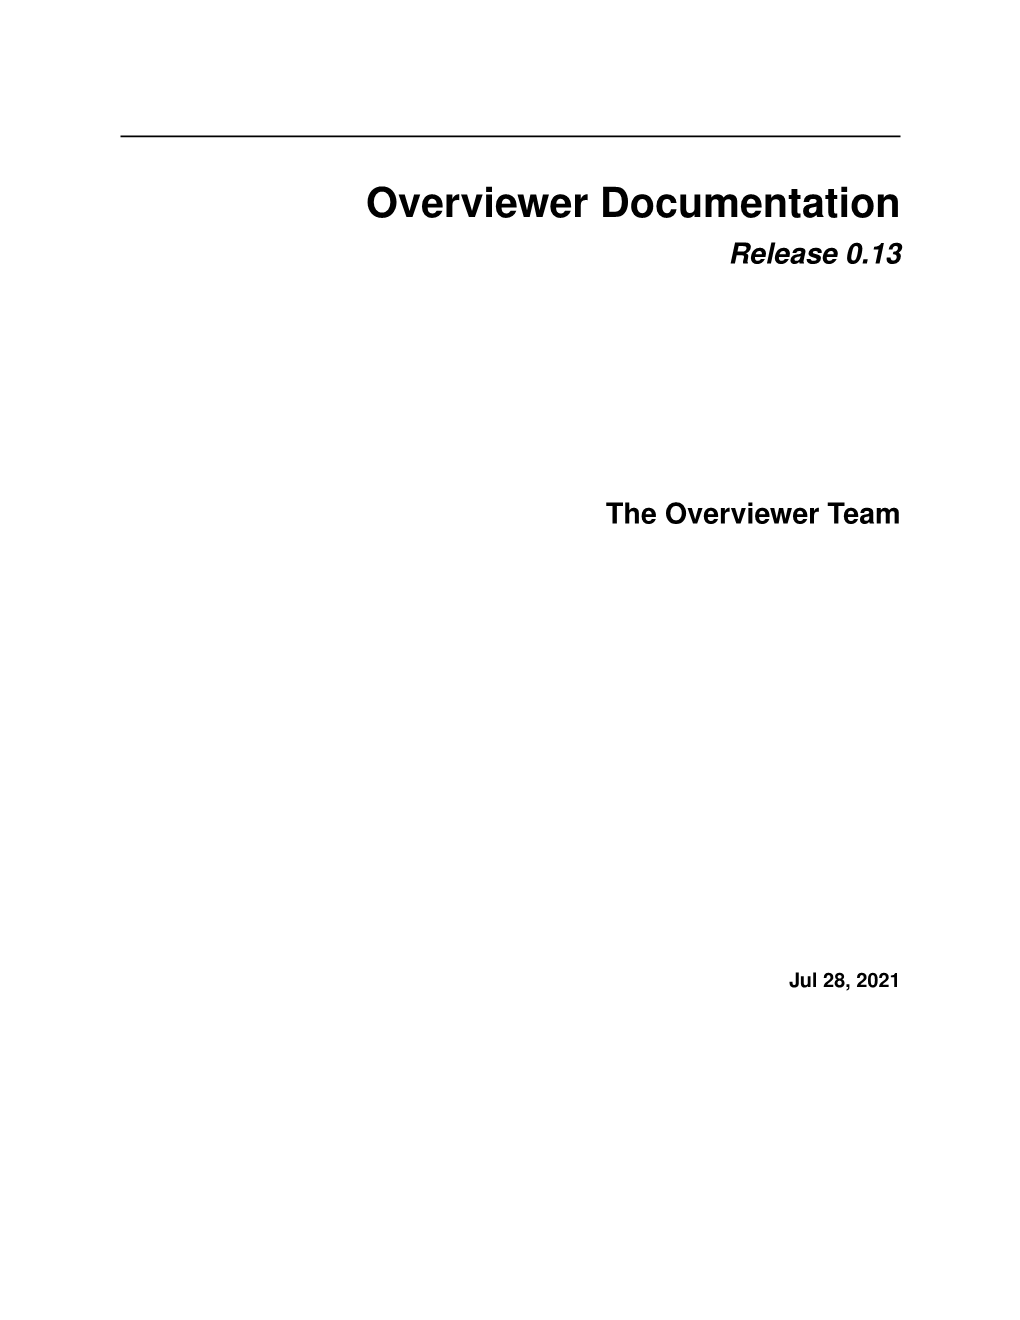 Overviewer Documentation Release 0.13